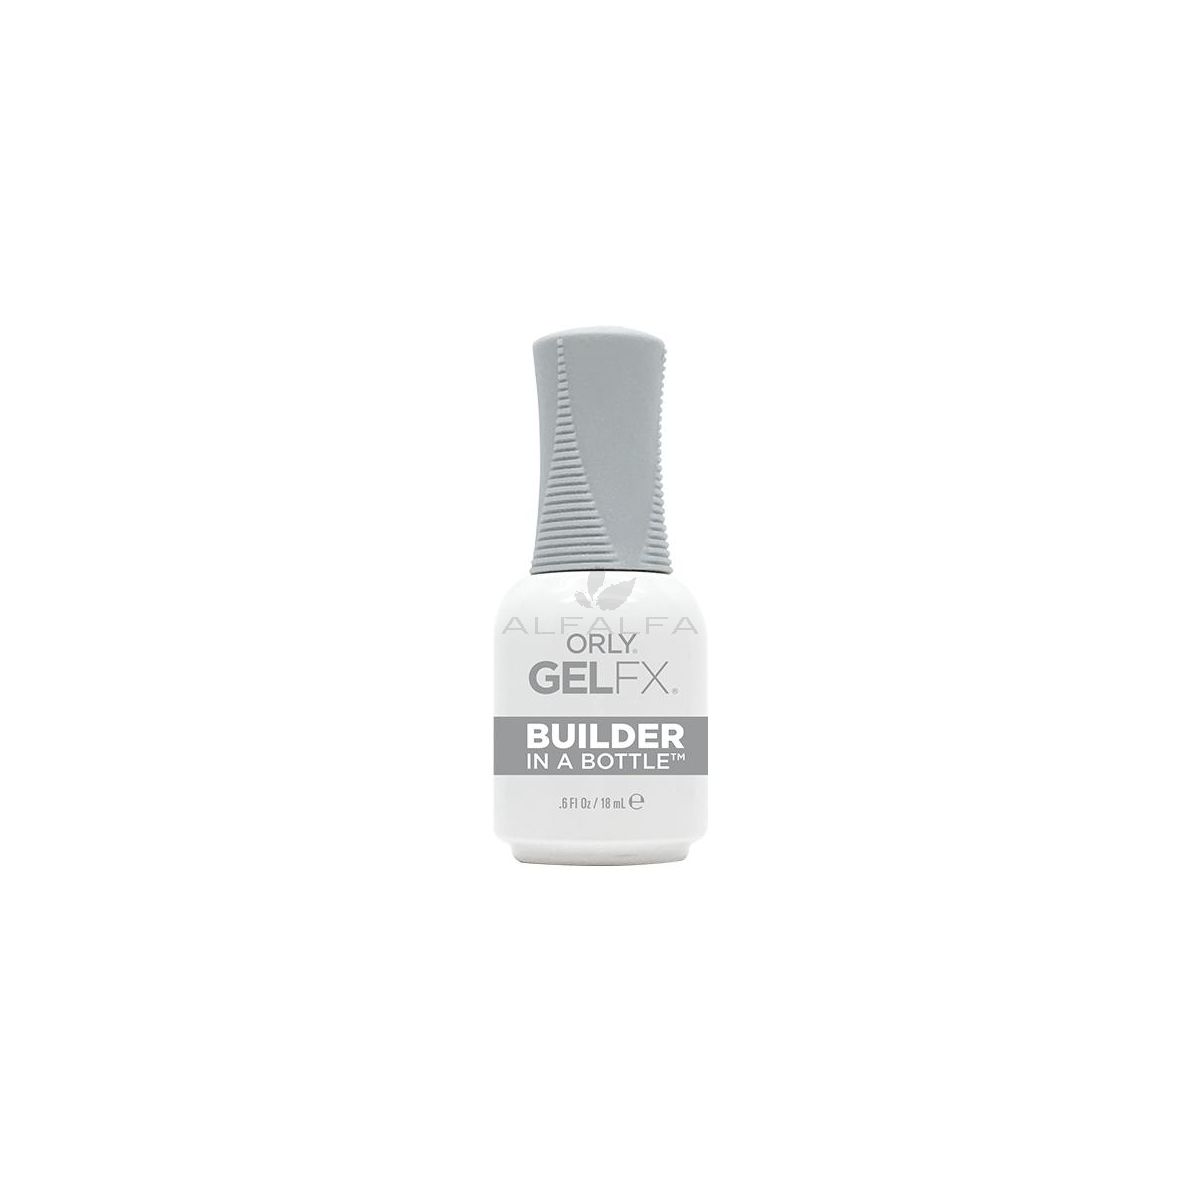 Orly Builder In A Bottle - 0.6 oz